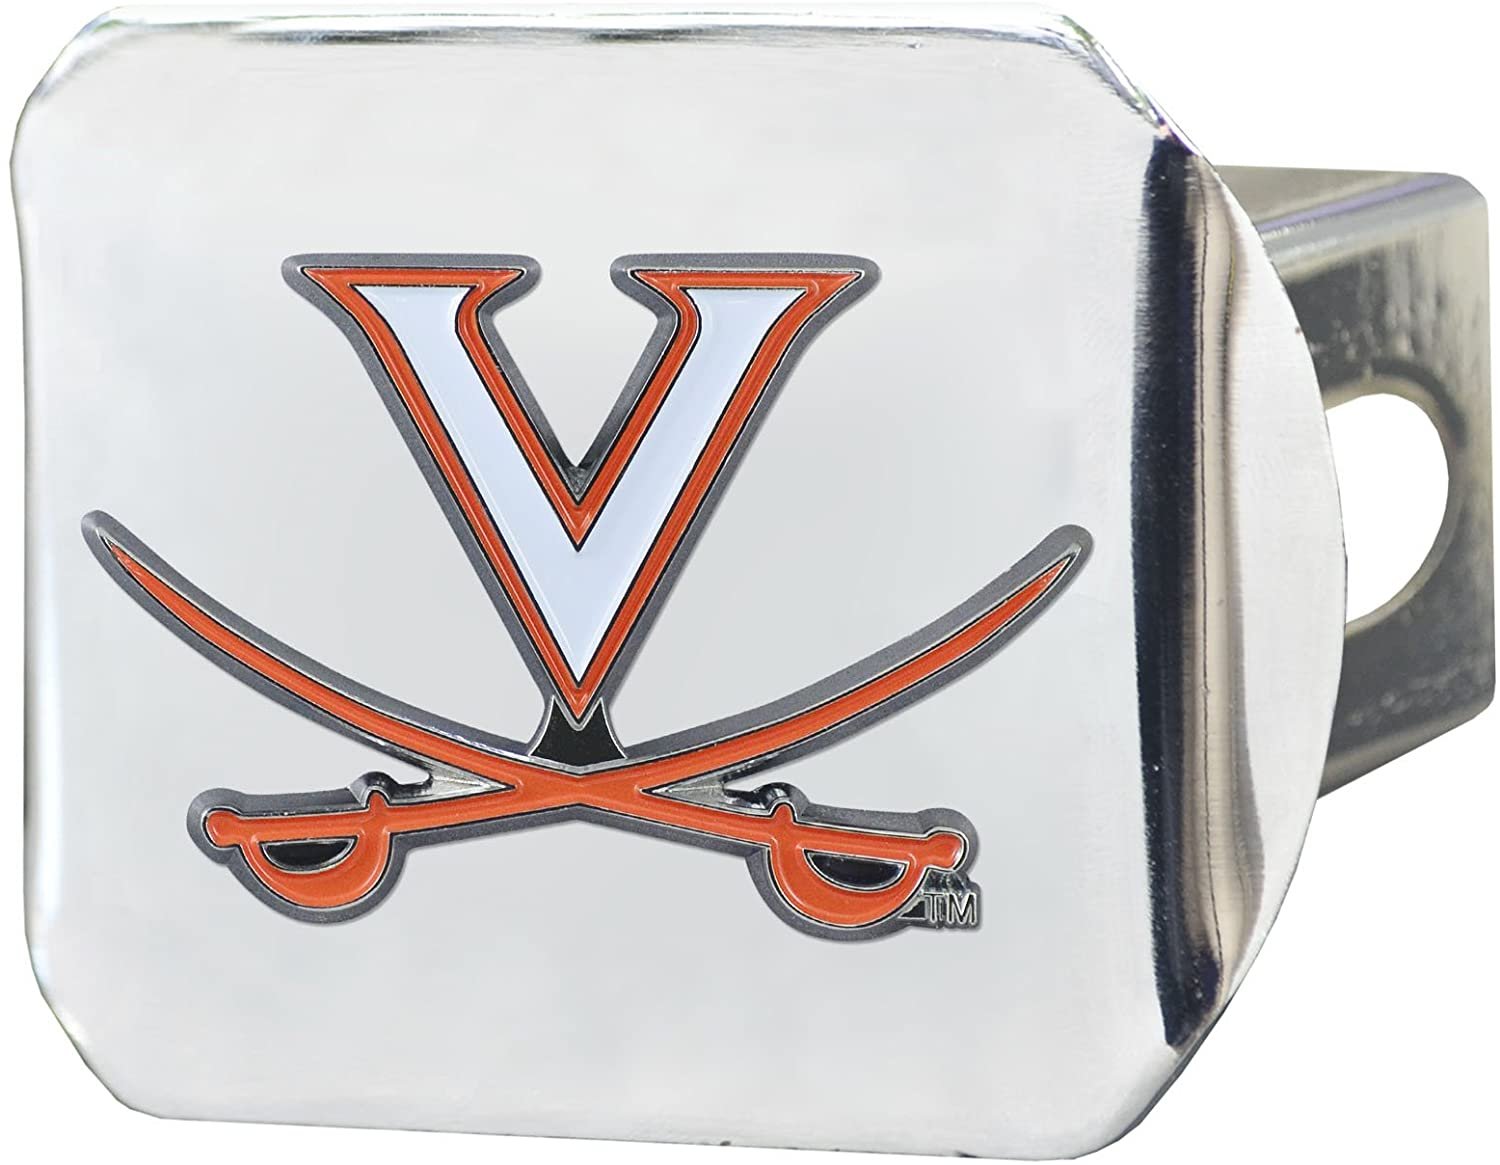 Virginia Cavaliers Hitch Cover Solid Metal with Raised Color Metal Emblem 2" Square Type III University of